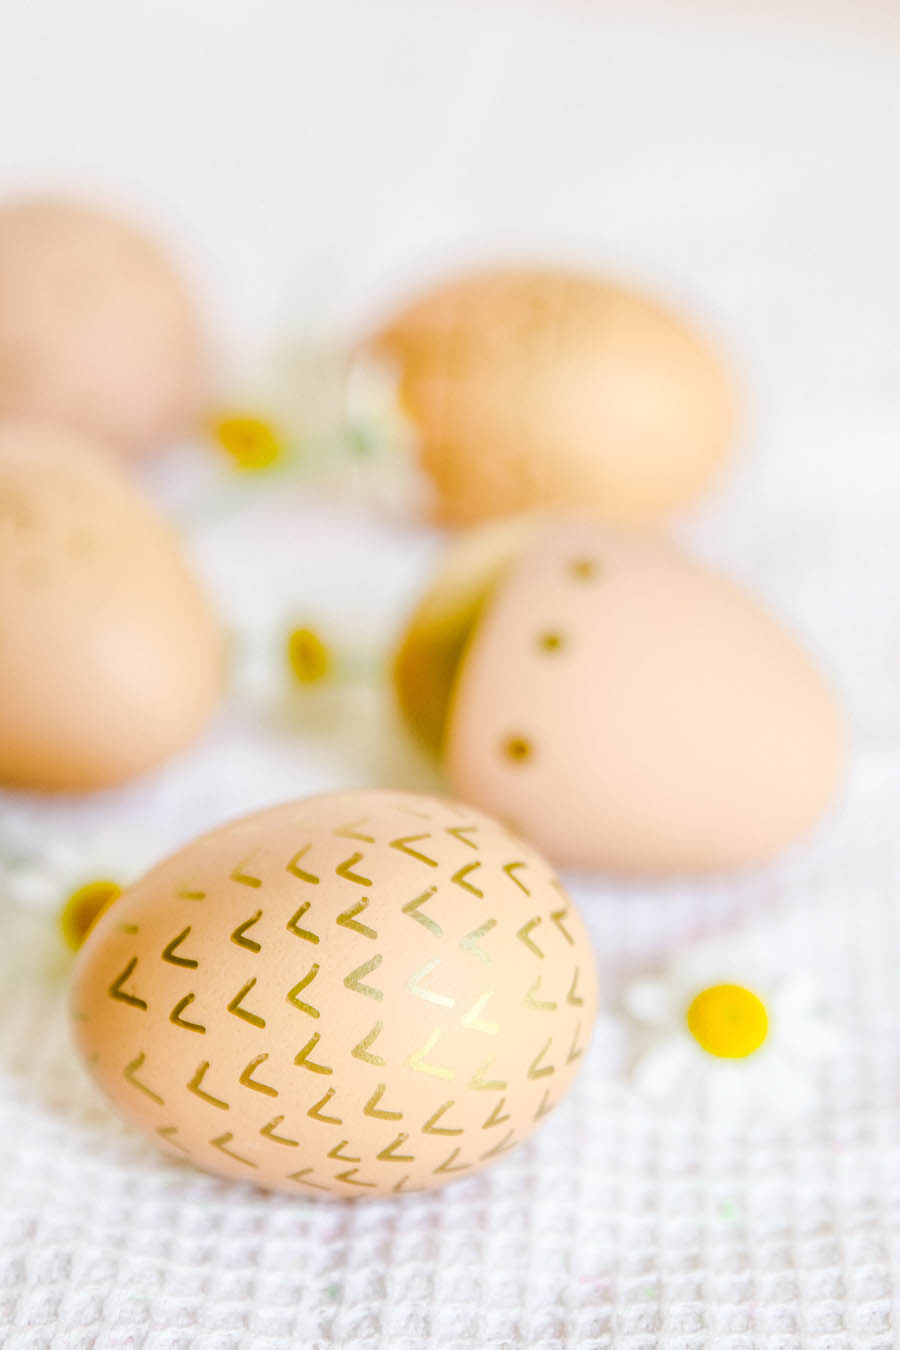 Decorating Brown Eggs for Easter.